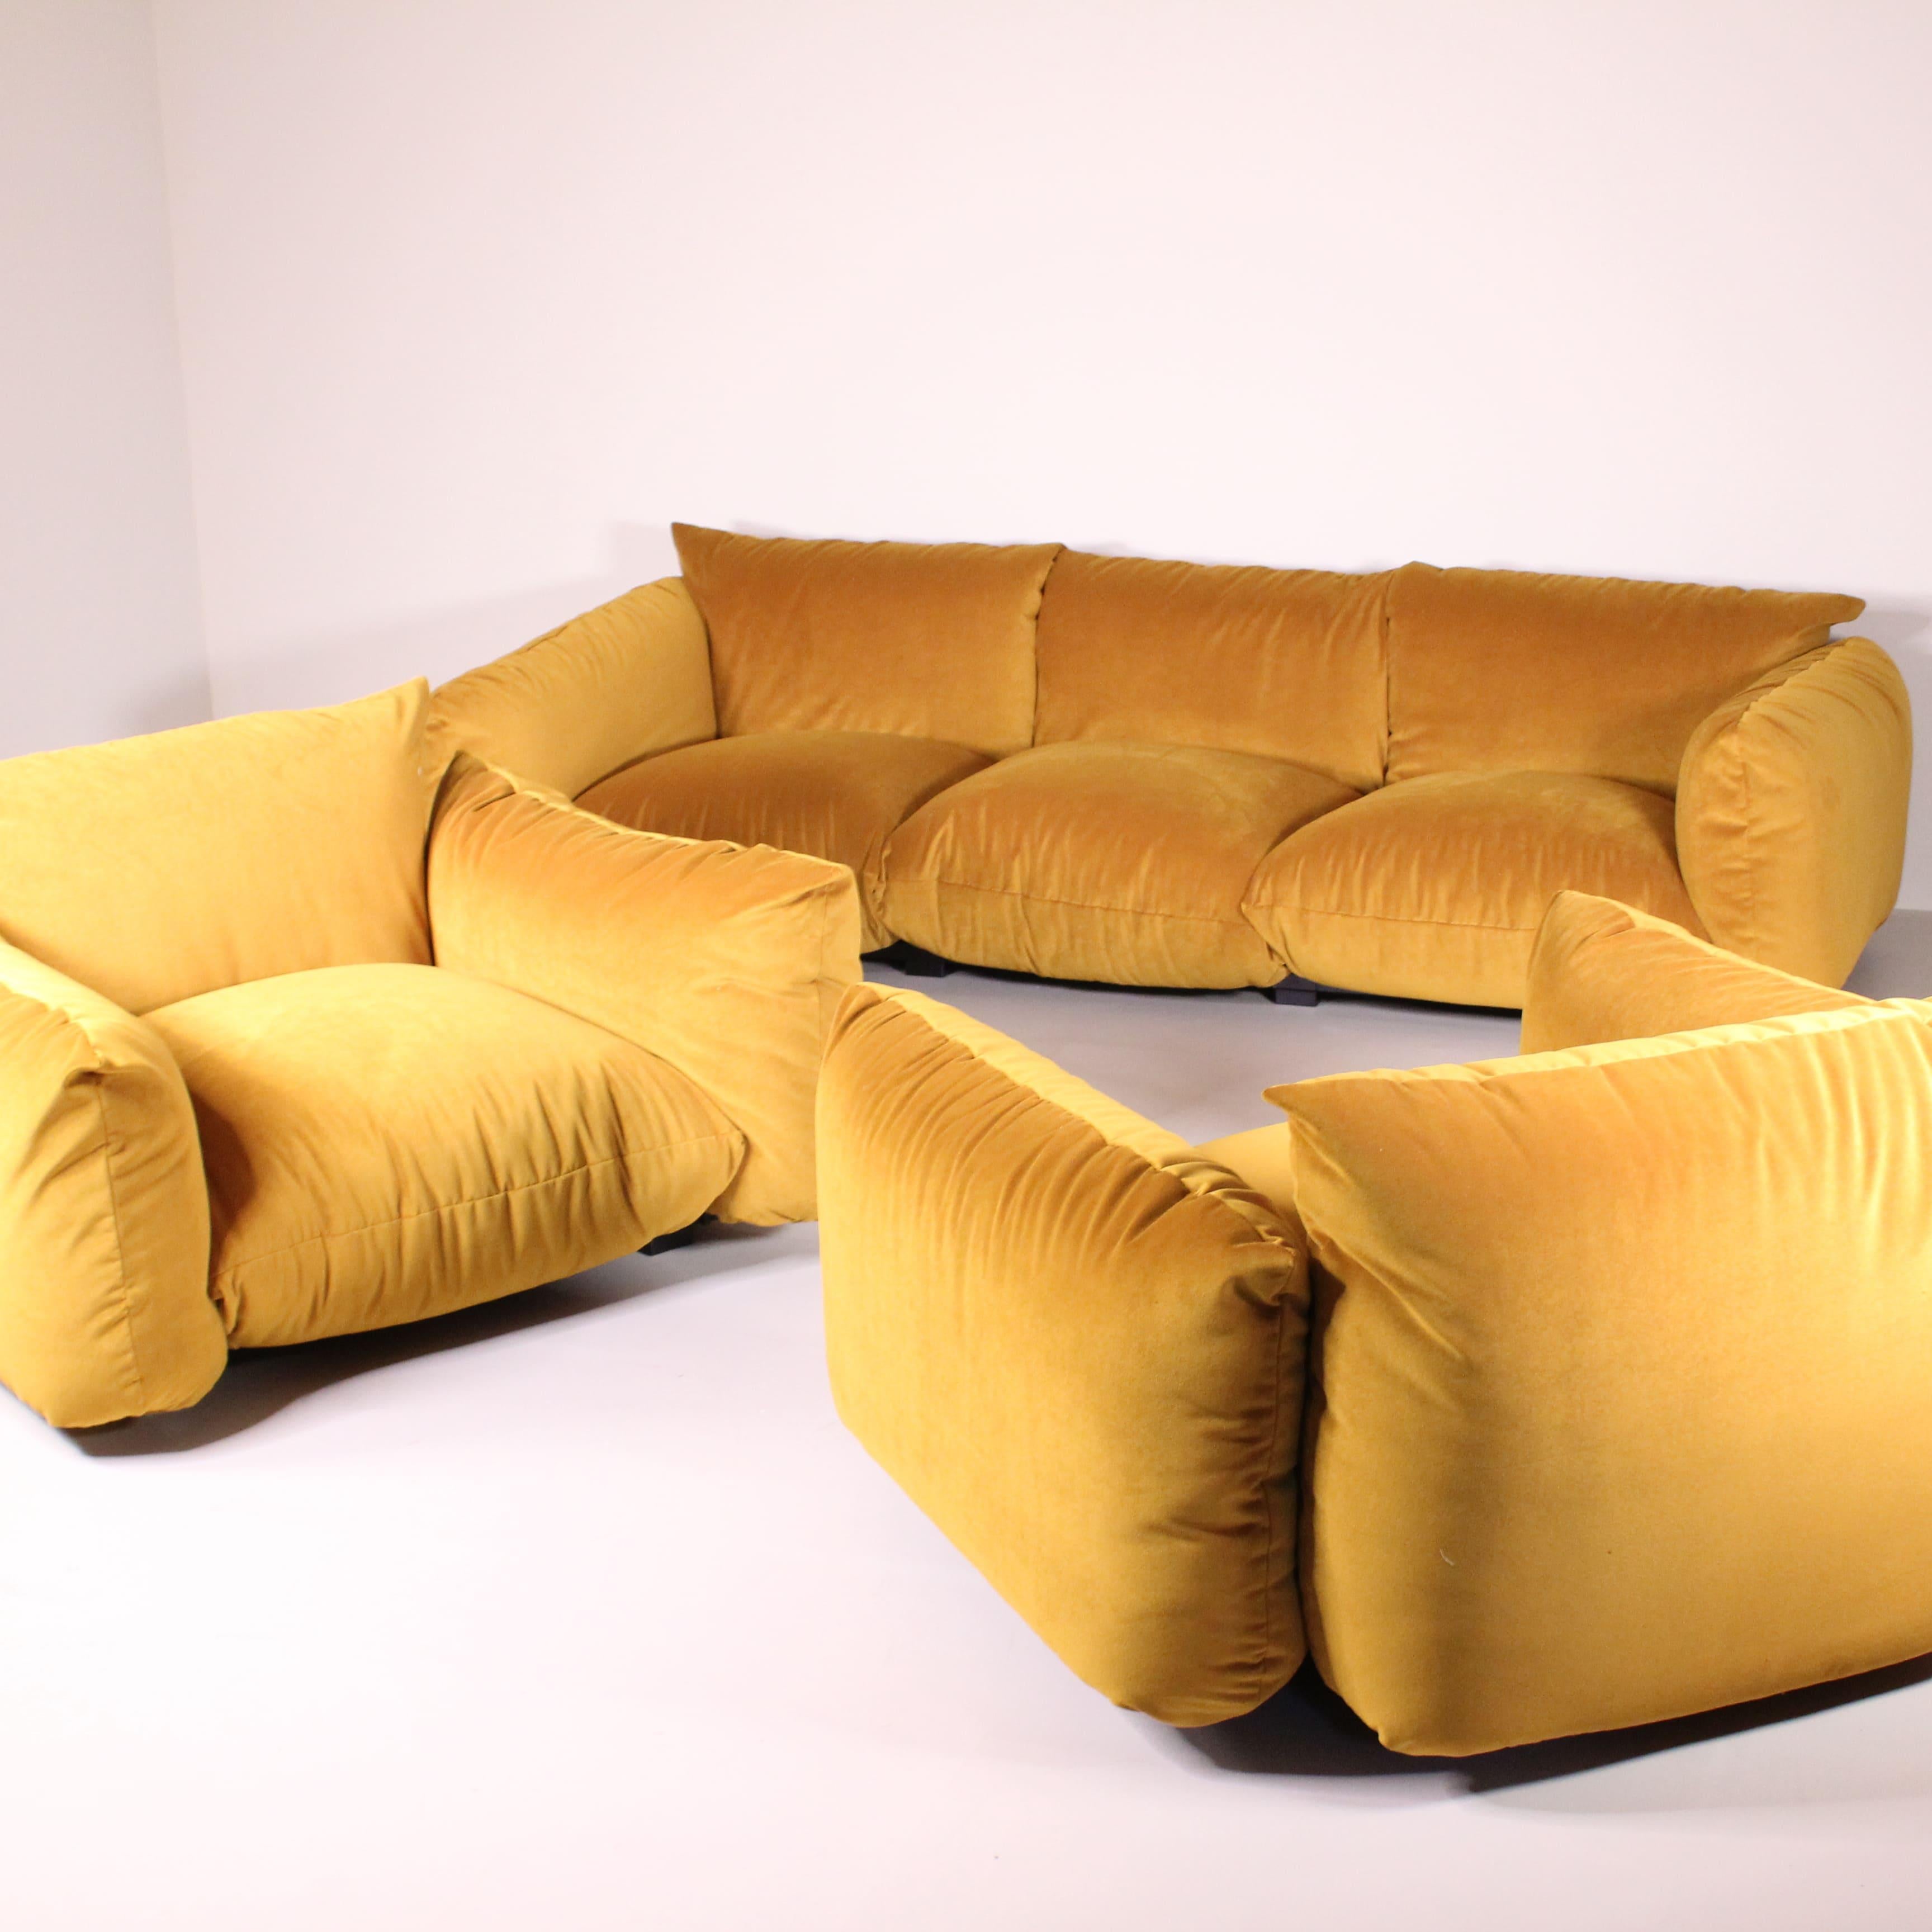 Marenco sofa and 2 armchairs set, Mario Marenco for Arflex, 1970 For Sale 1